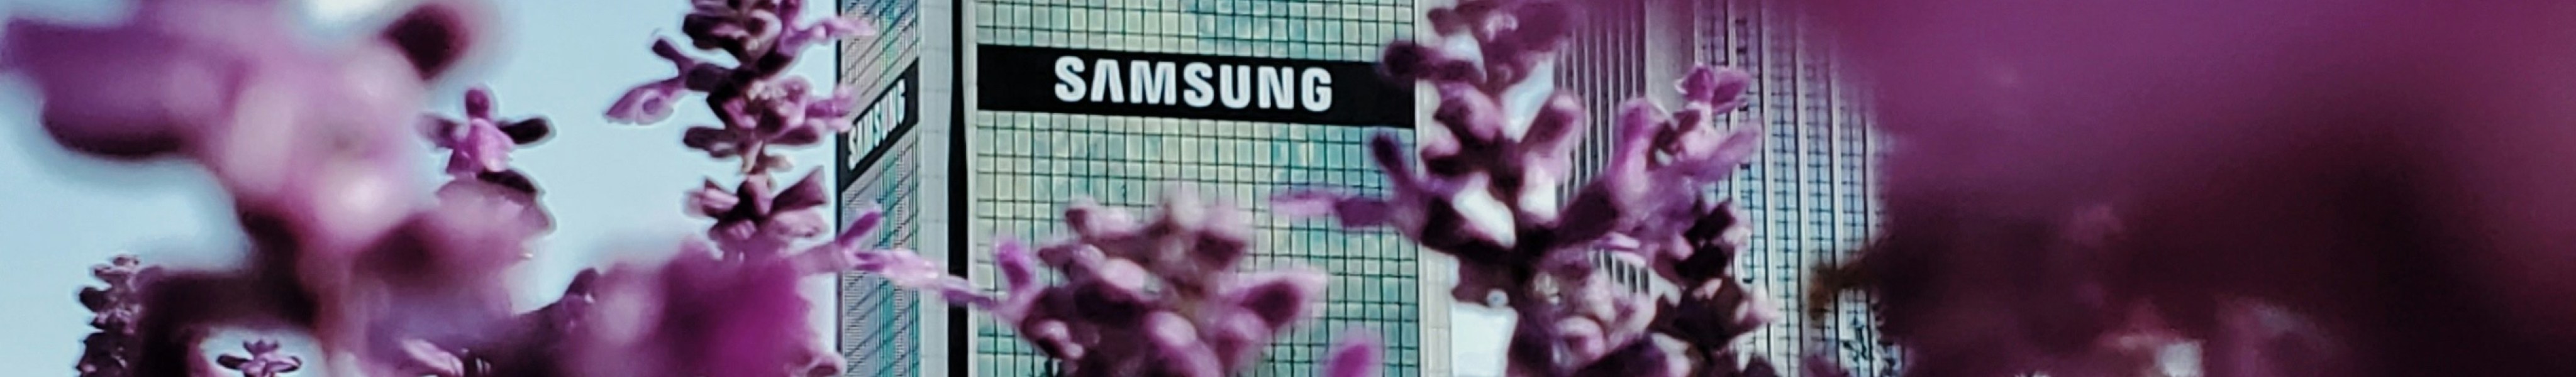 Samsung office building pictured through violet-coloured flowers.